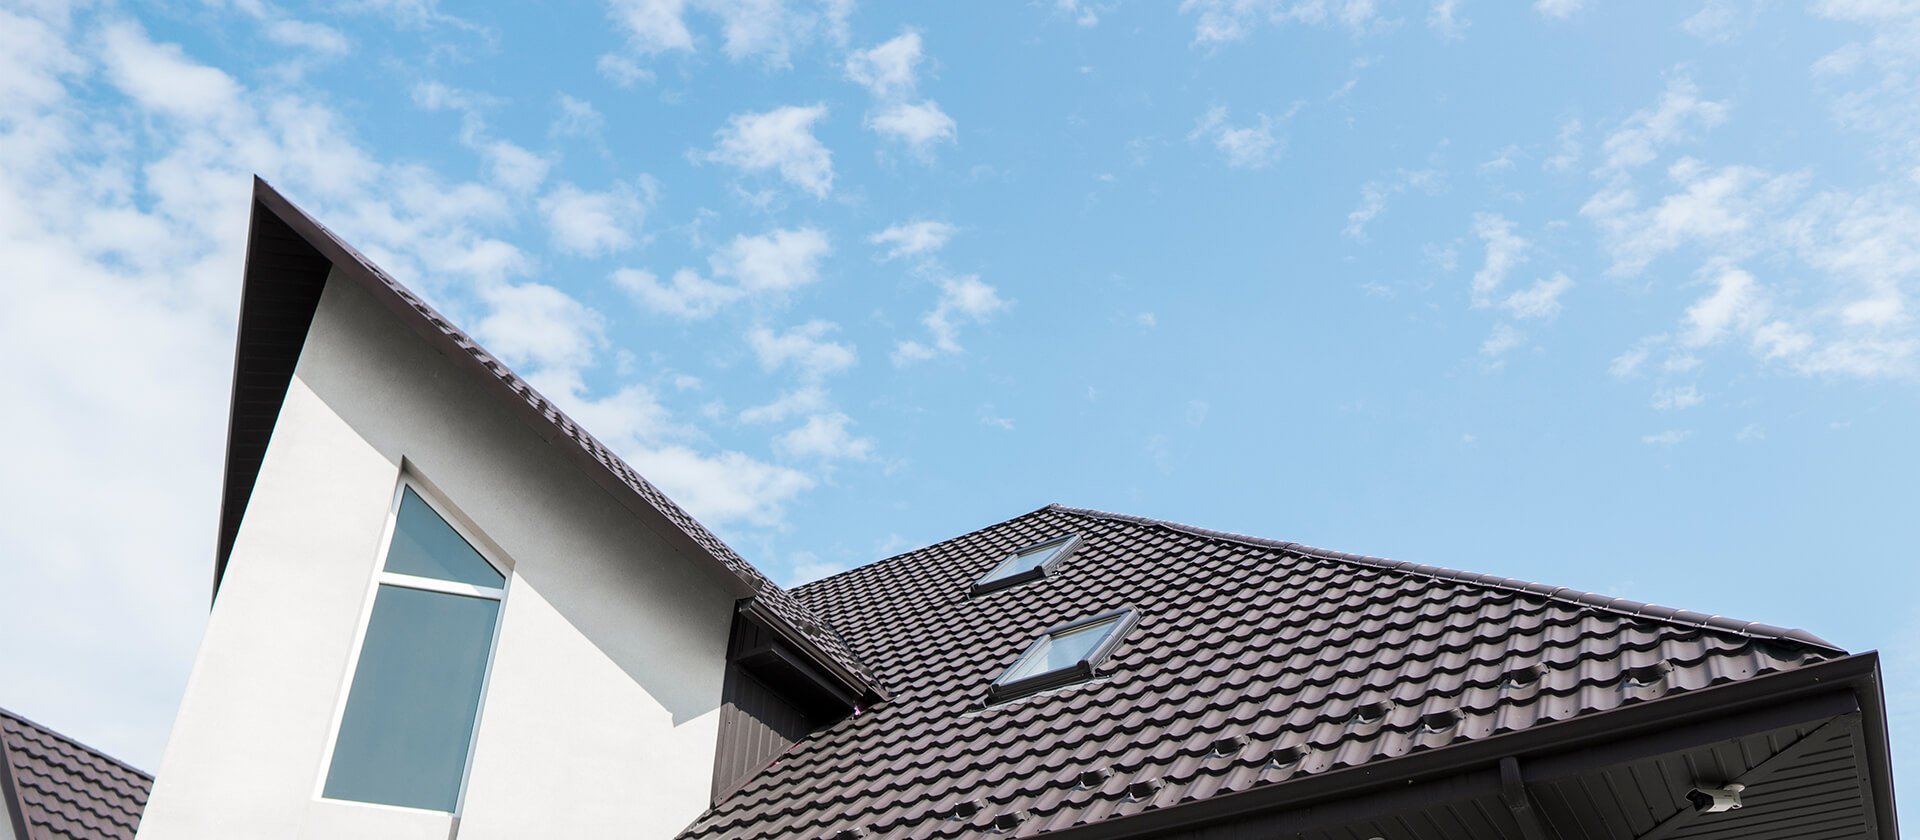 Roofing tips & tricks